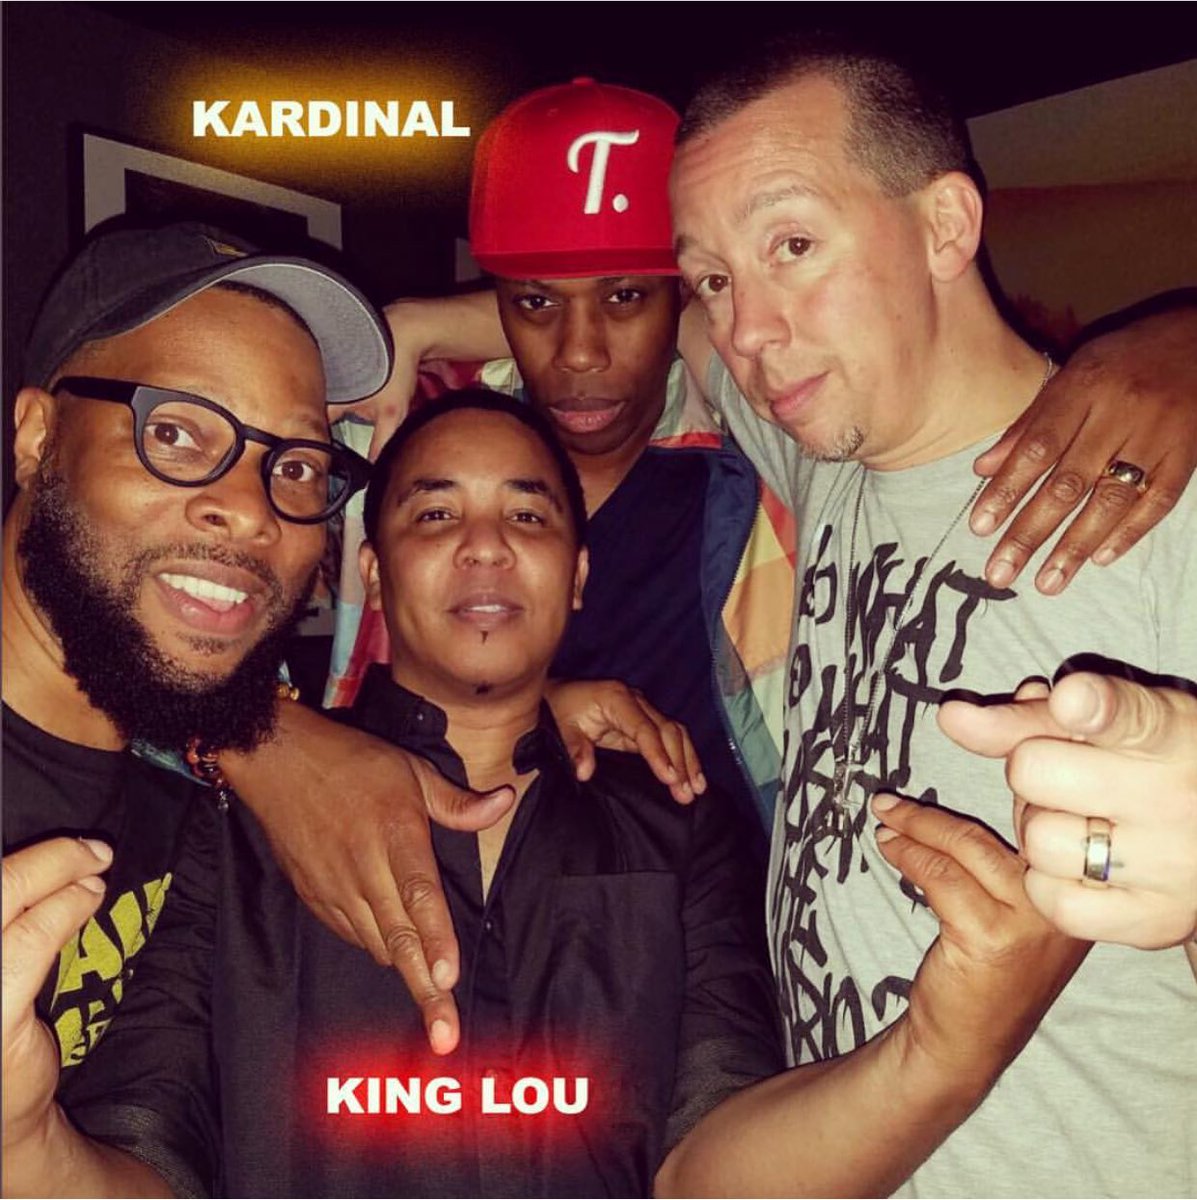 🔥Kardinal Offishall🔥
🔥DJ Starting From Scratch🔥
🔥DJ K-Cut 🔥 Main Source HipHop Group
Before“Instagram” IG.☝️😉
There were Original G’s 
Put a 👌🏼👏🏼or✊🏽 and LET IT BE KNOWN!
Canada 🇨🇦👌✨
#Kardinal #kardinaloffishall 
#StartingFromScratch
#MainSource